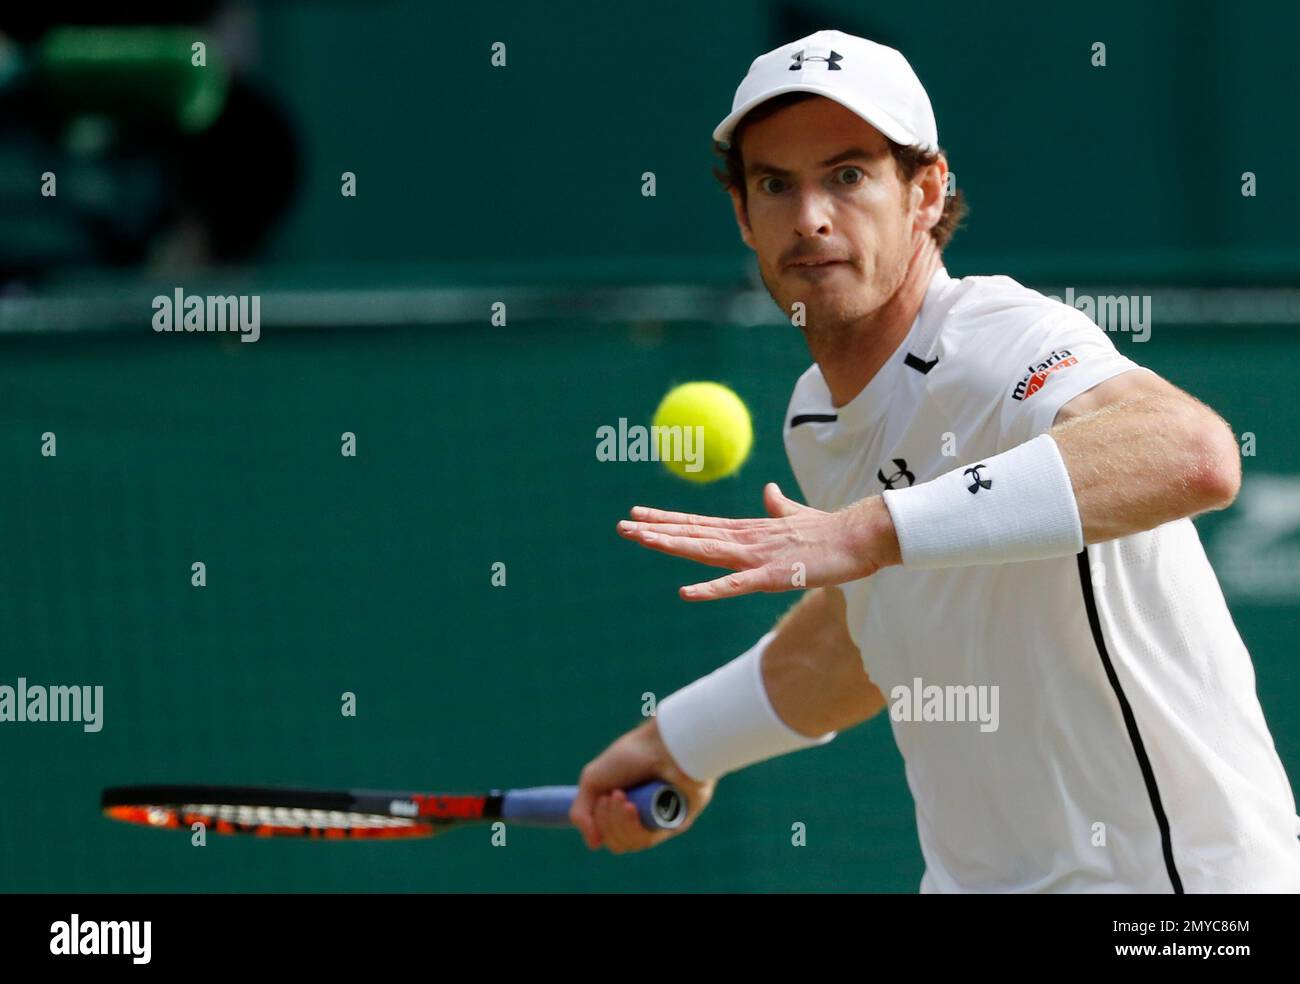 Andy Murray of Britain returns to Tomas Berdych of the Czech Republic during their men's semifinal singles match on day twelve of the Wimbledon Tennis Championships in London, Friday, July 8, 2016. (AP Photo/Ben Curtis) Stock Photo